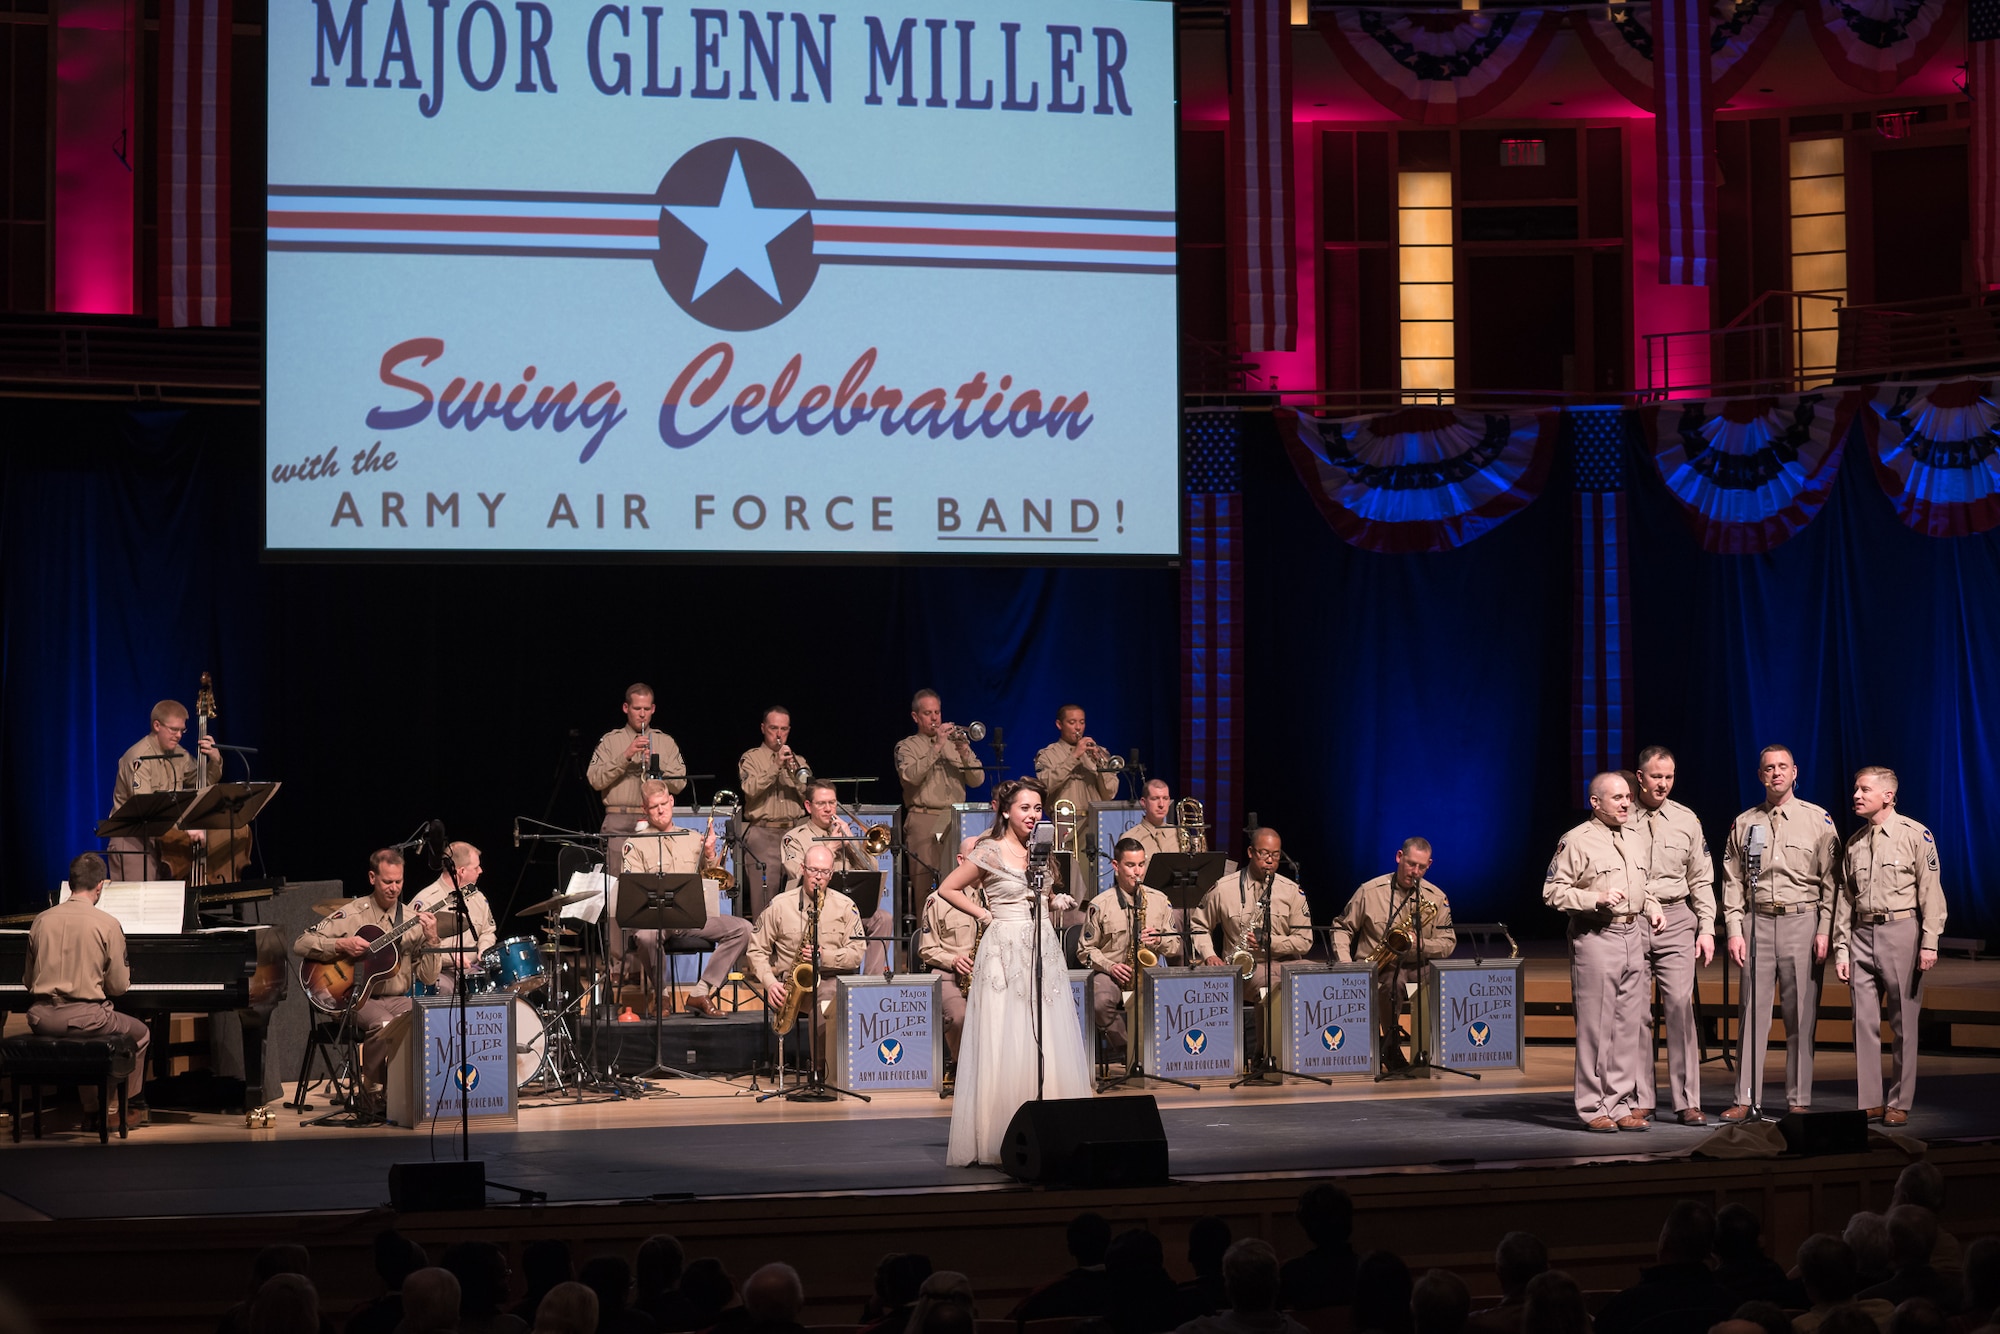 Acclaimed jazz vocalist Veronica Swift sings during "On the Air: A Glenn Miller Swing Celebration," a show featuring The U.S. Air Force Band performing the music of big band legend Major Glenn Miller on April 2, 2019, at the Music Center at Strathmore in North Bethesda, Maryland. The U.S. Air Force Band partnered with Washington Performing Arts to present this concert highlighting the legacy of Major Miller's music and his leadership of the Army Air Force Band. This year marks the 75th anniversary of the disappearance of Miller's plane during World War II. (U.S. Air Force Photo by Technical Sgt. Valentine Lukashuk)